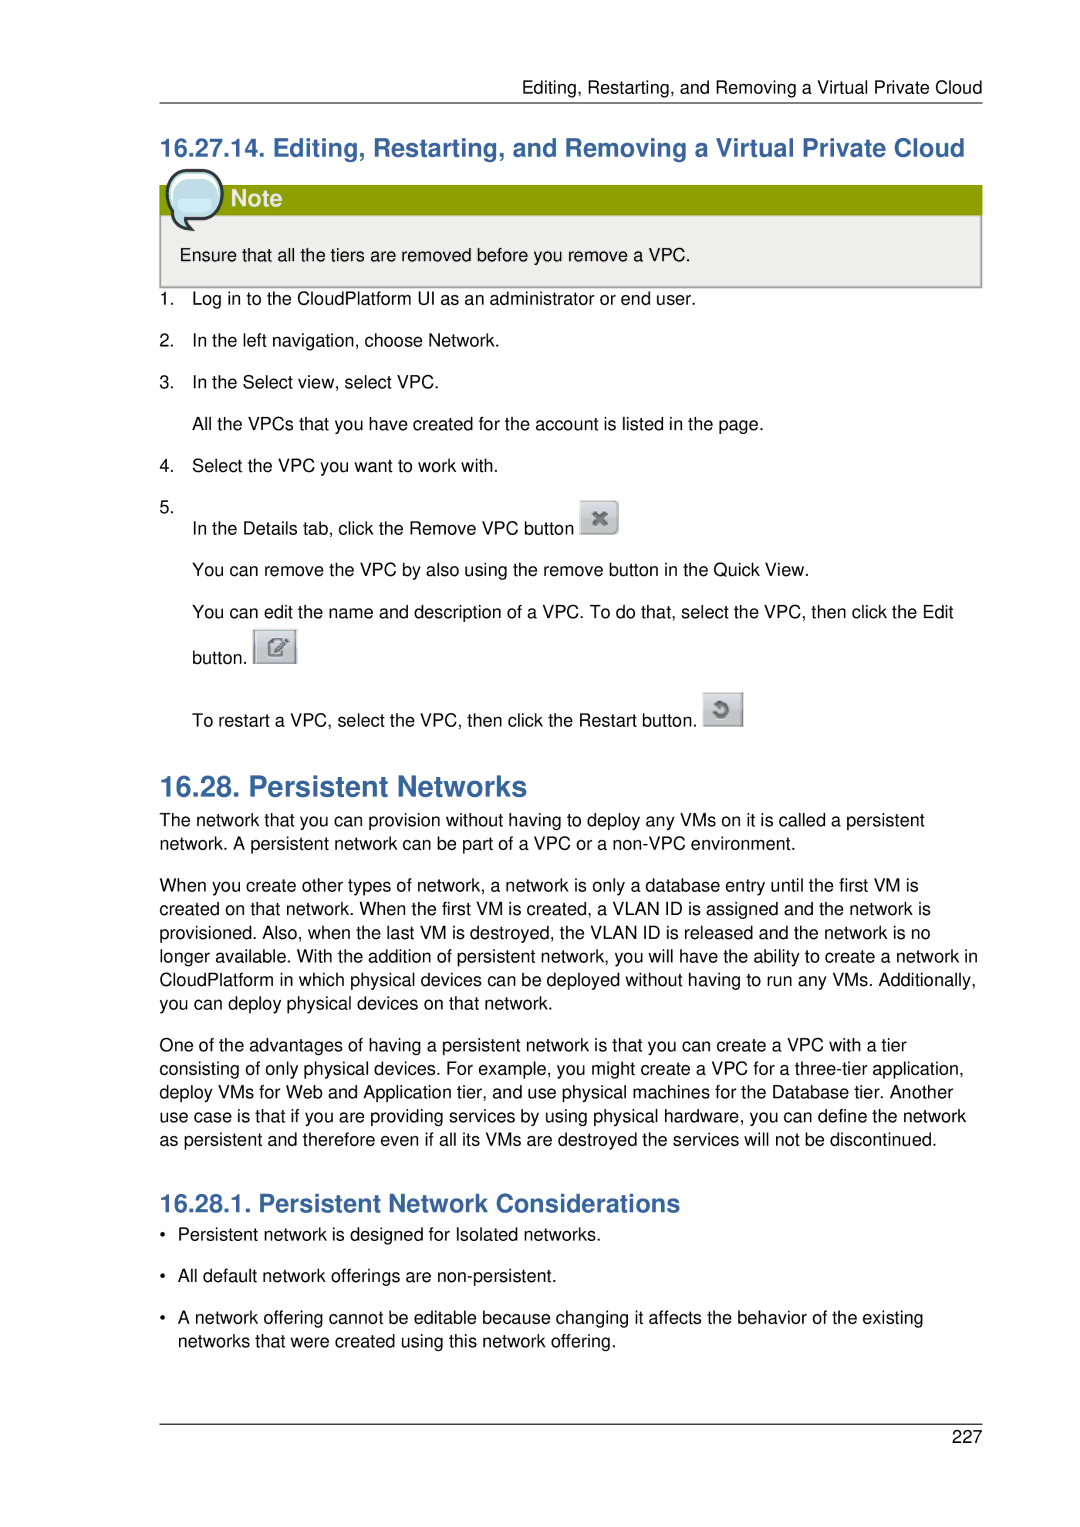 Citrix Systems 4.2 manual Persistent Networks, Editing, Restarting, and Removing a Virtual Private Cloud 